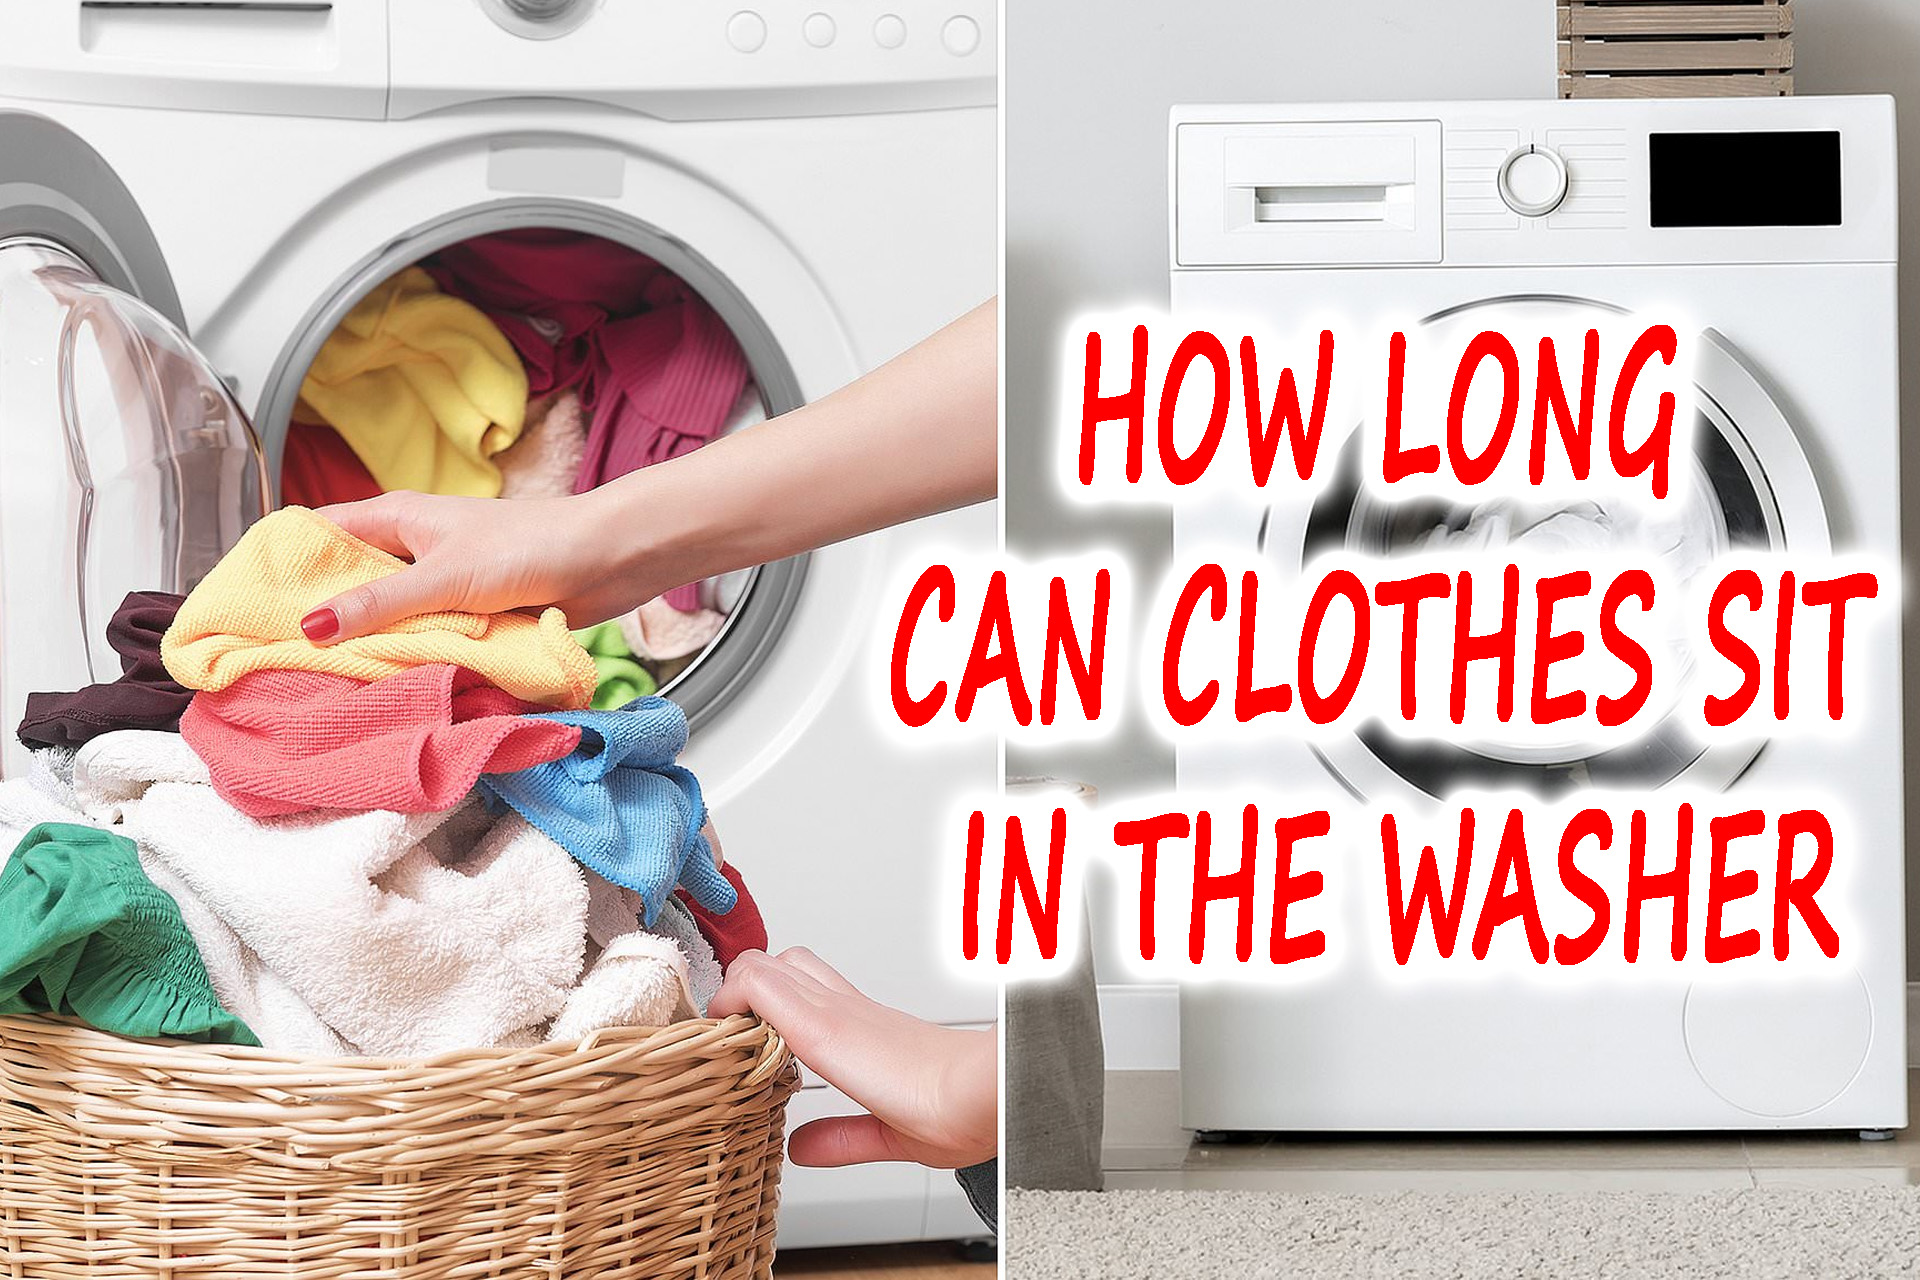 How Long Can Clothes Sit in the Washer